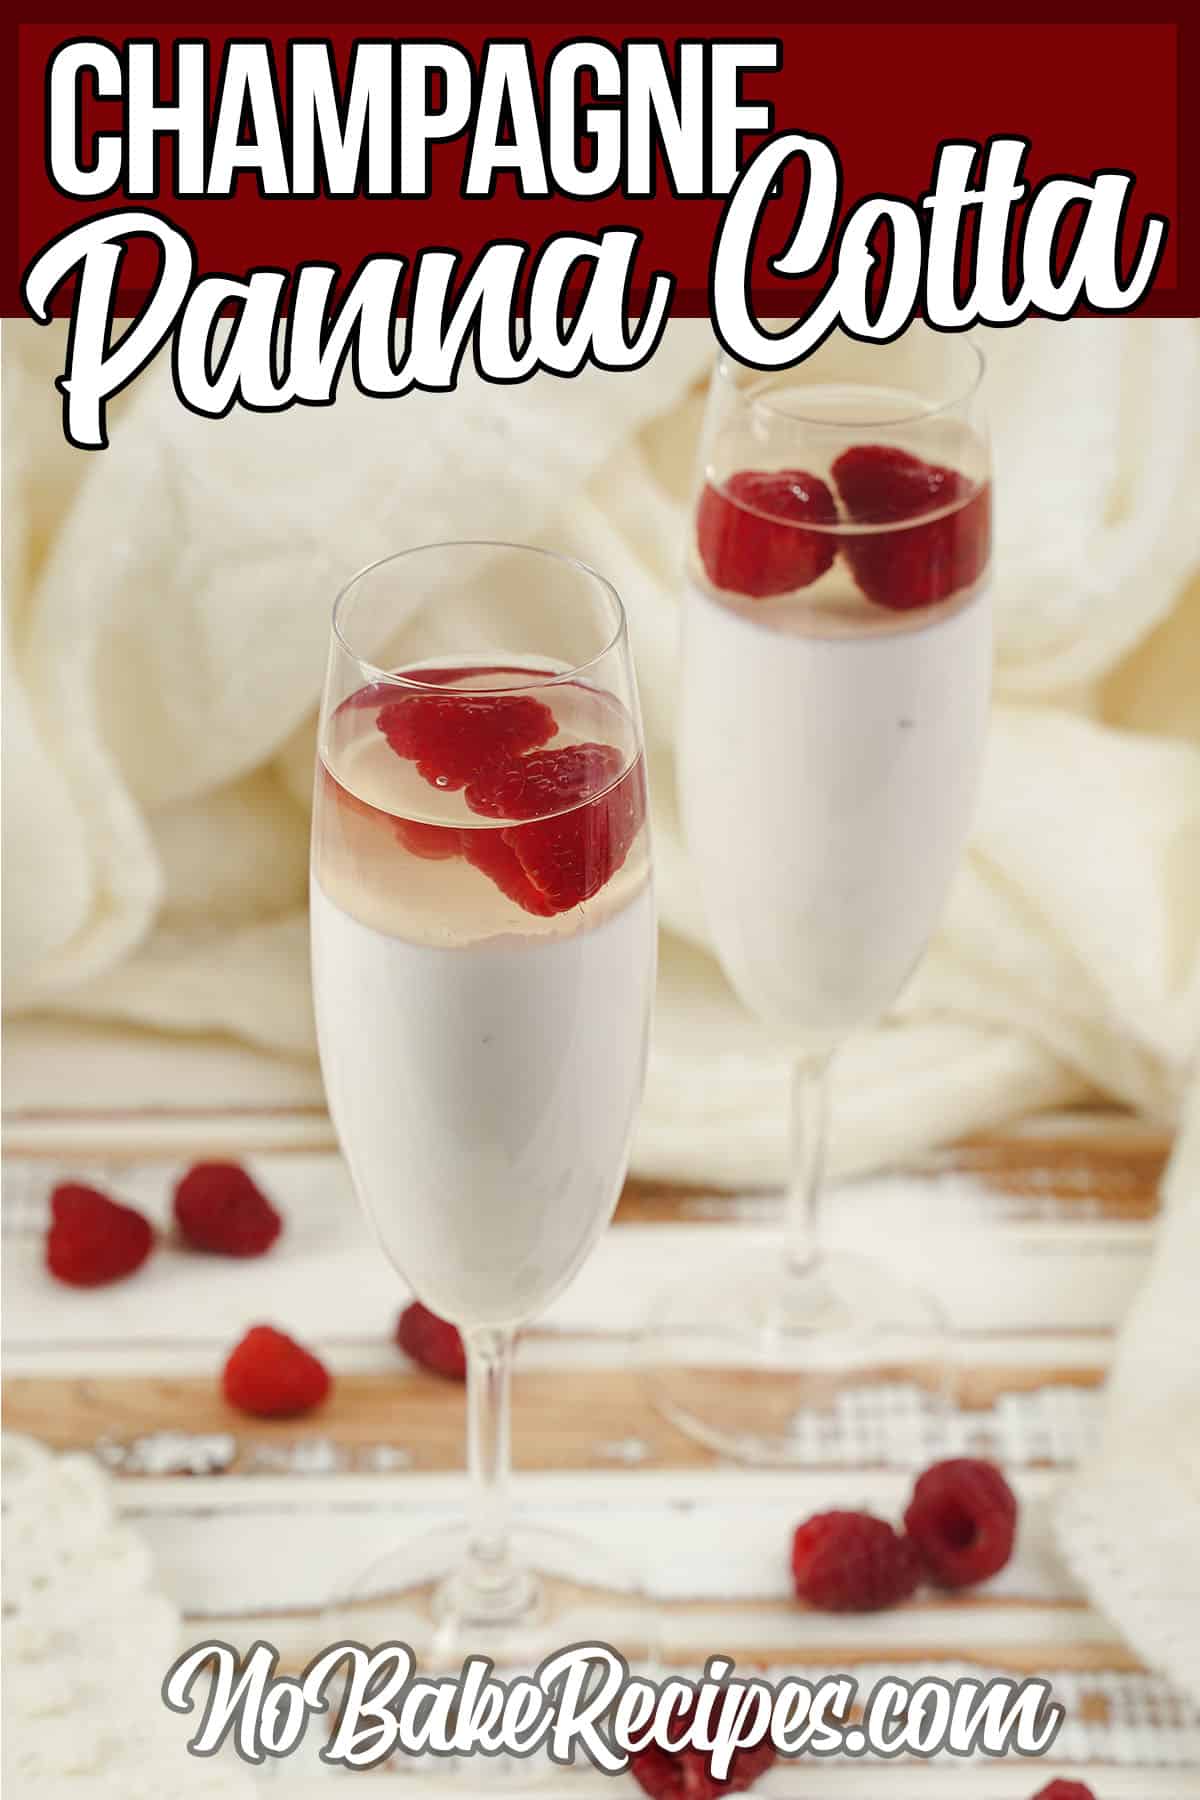 champagne glasses filled with panna cotta for valentines with text which reads champagne panna cotta